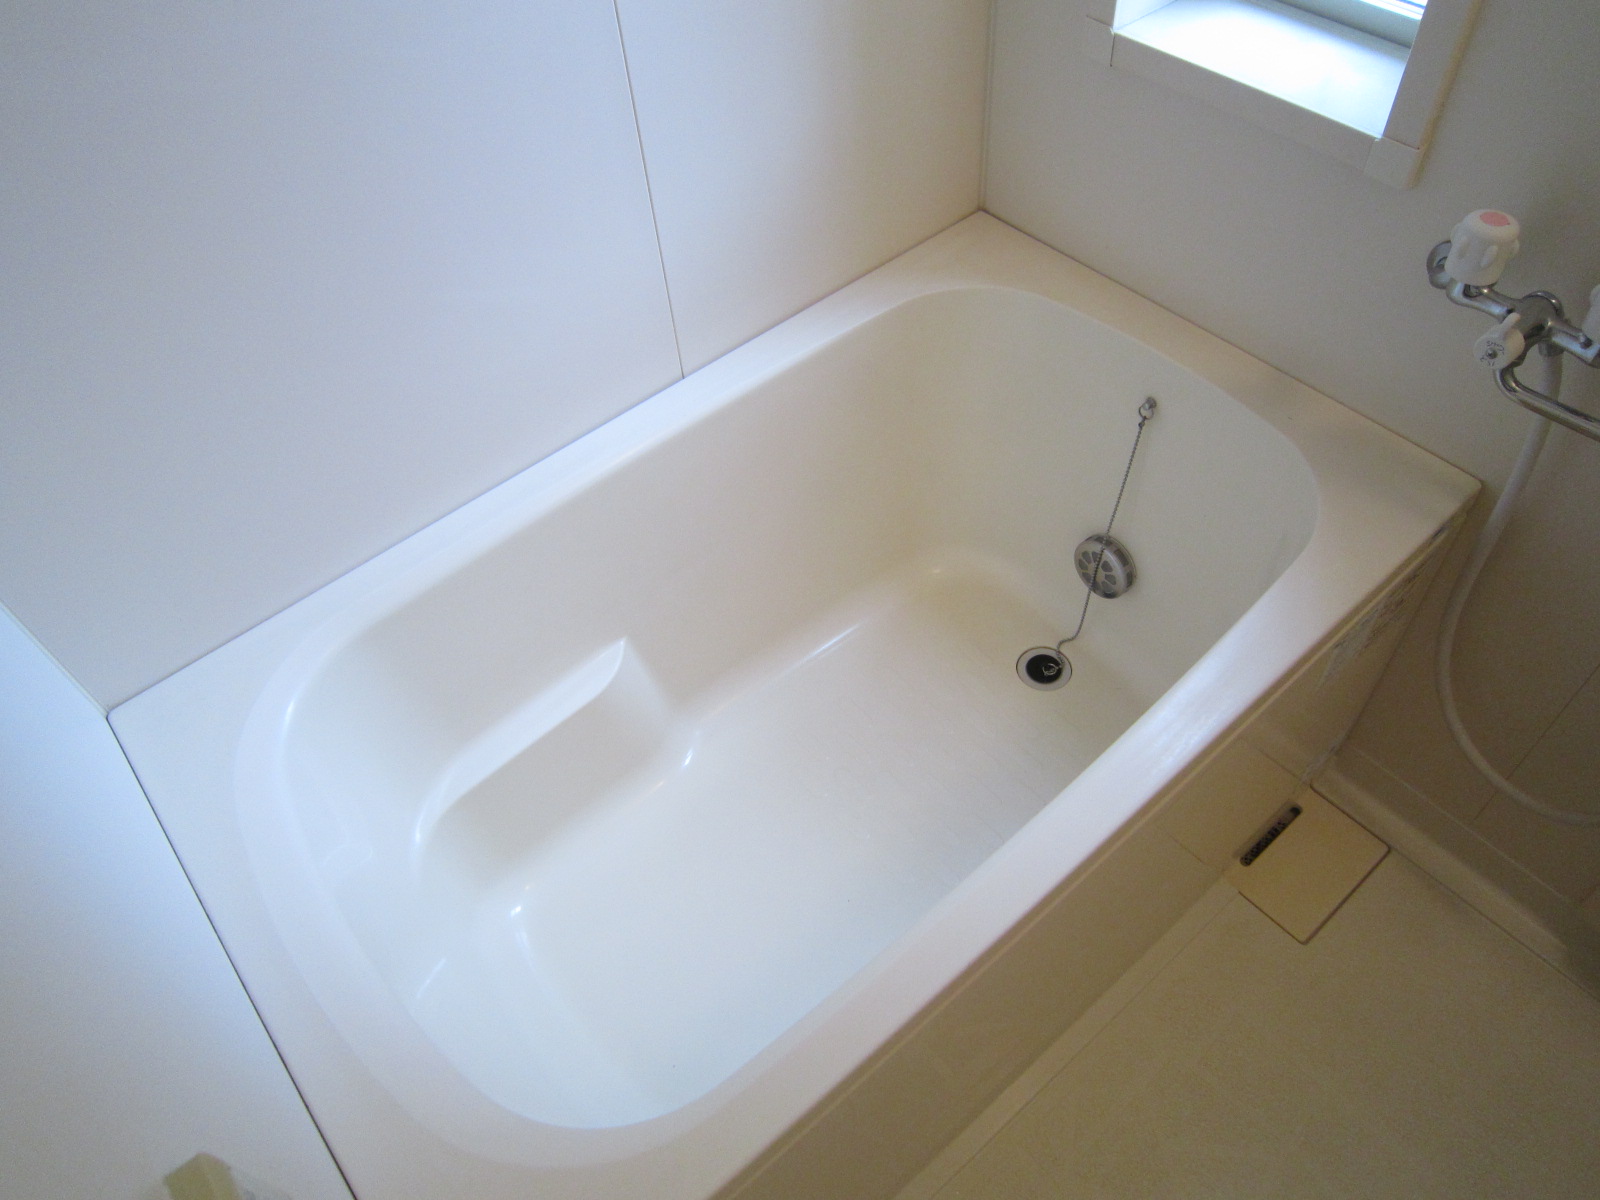 Bath. With add-fired function [There is a window in the bathroom]